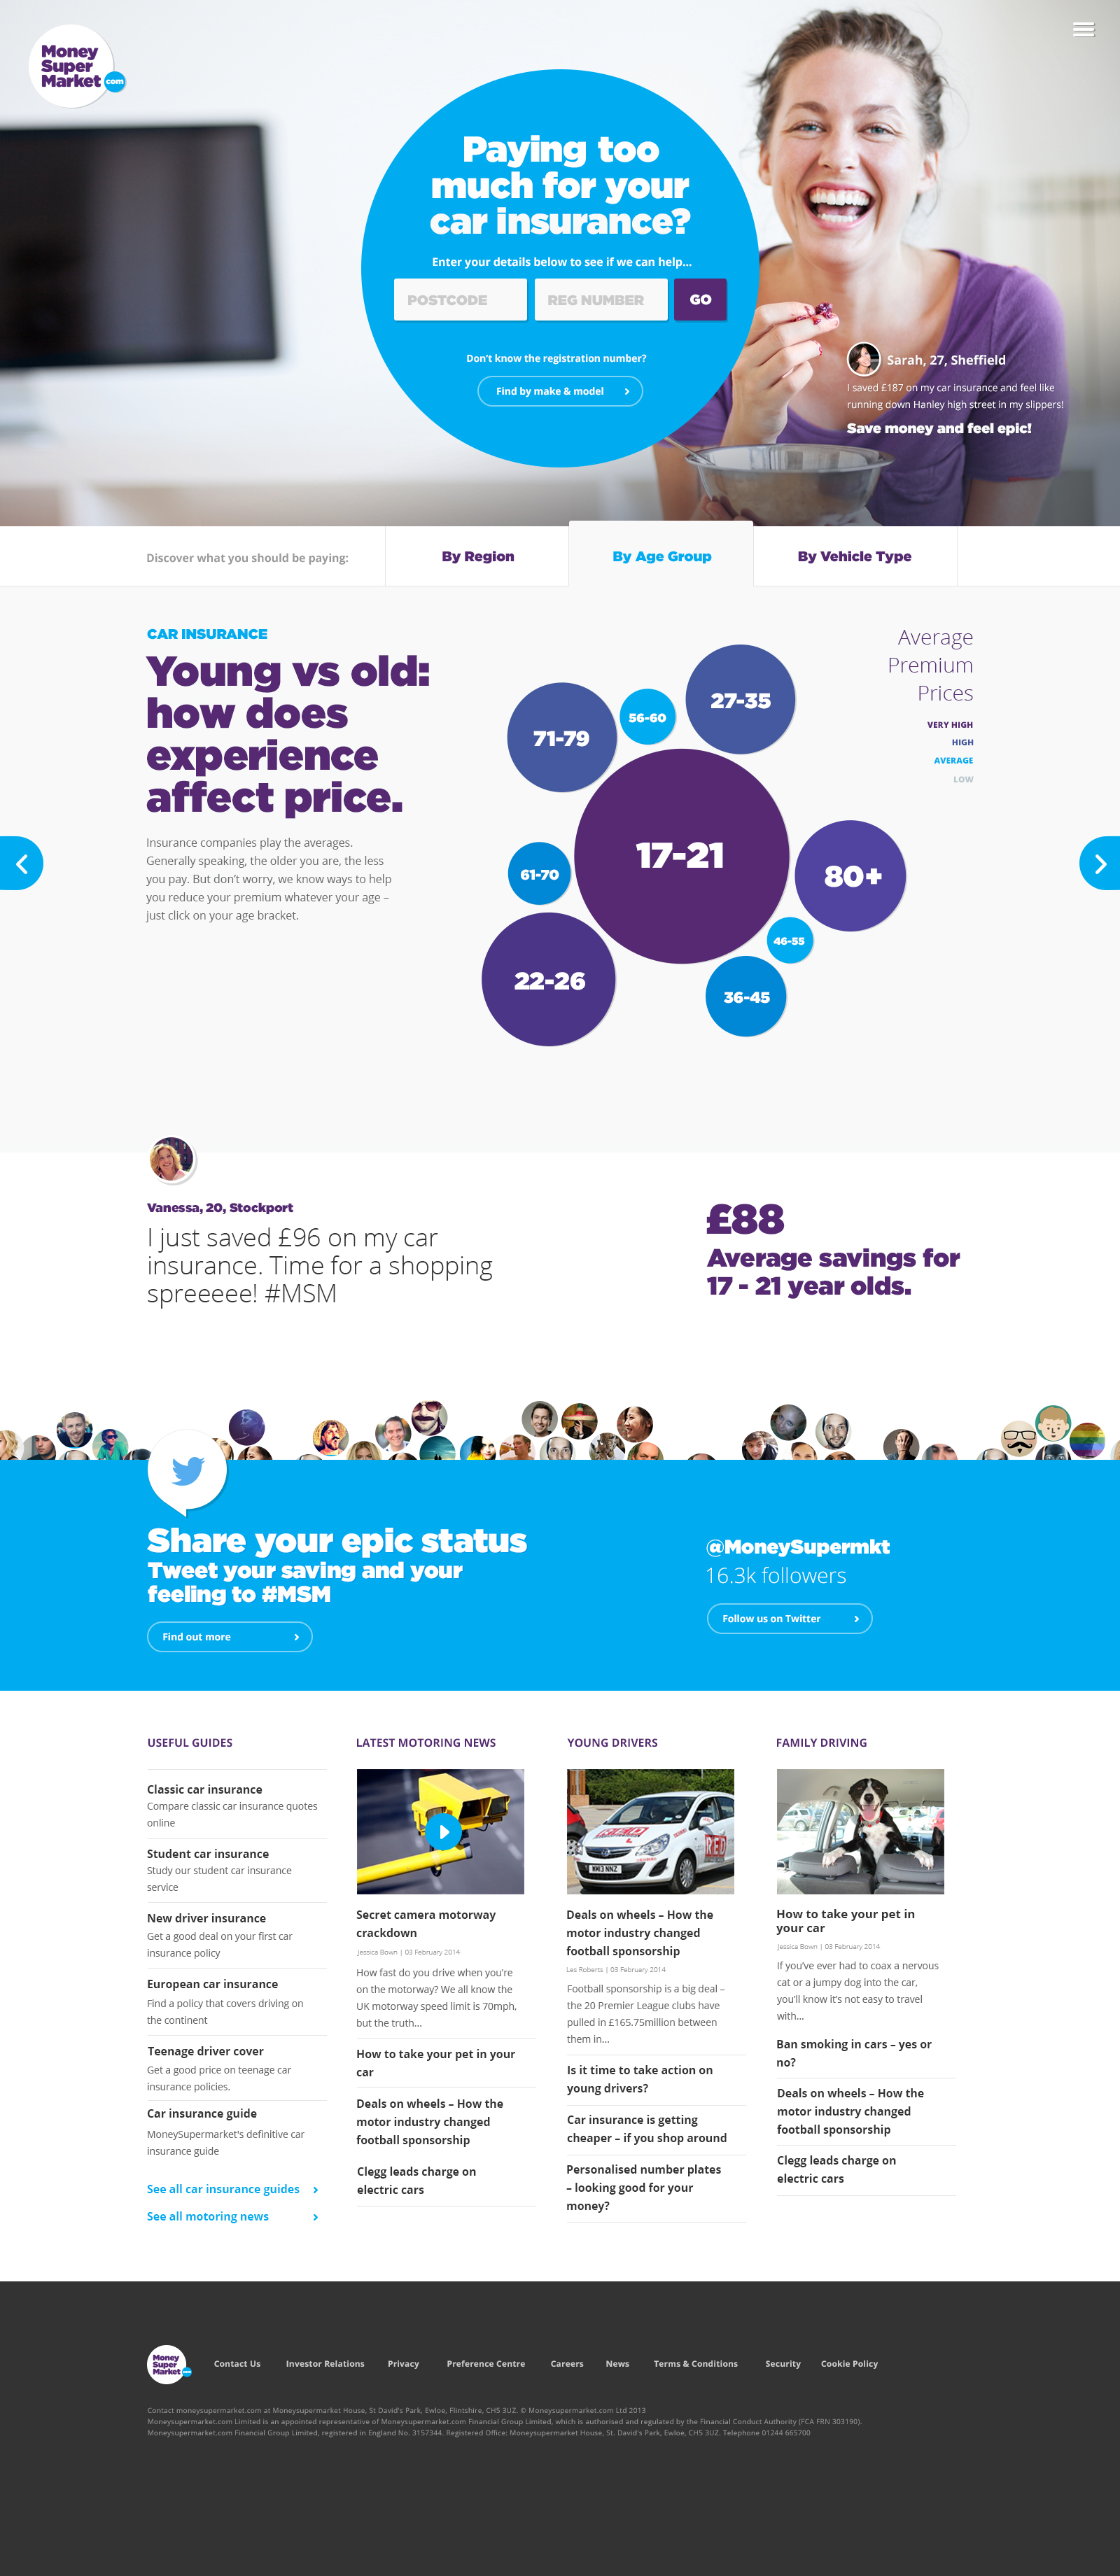 1.1_Landing_Page_By_Age_Group